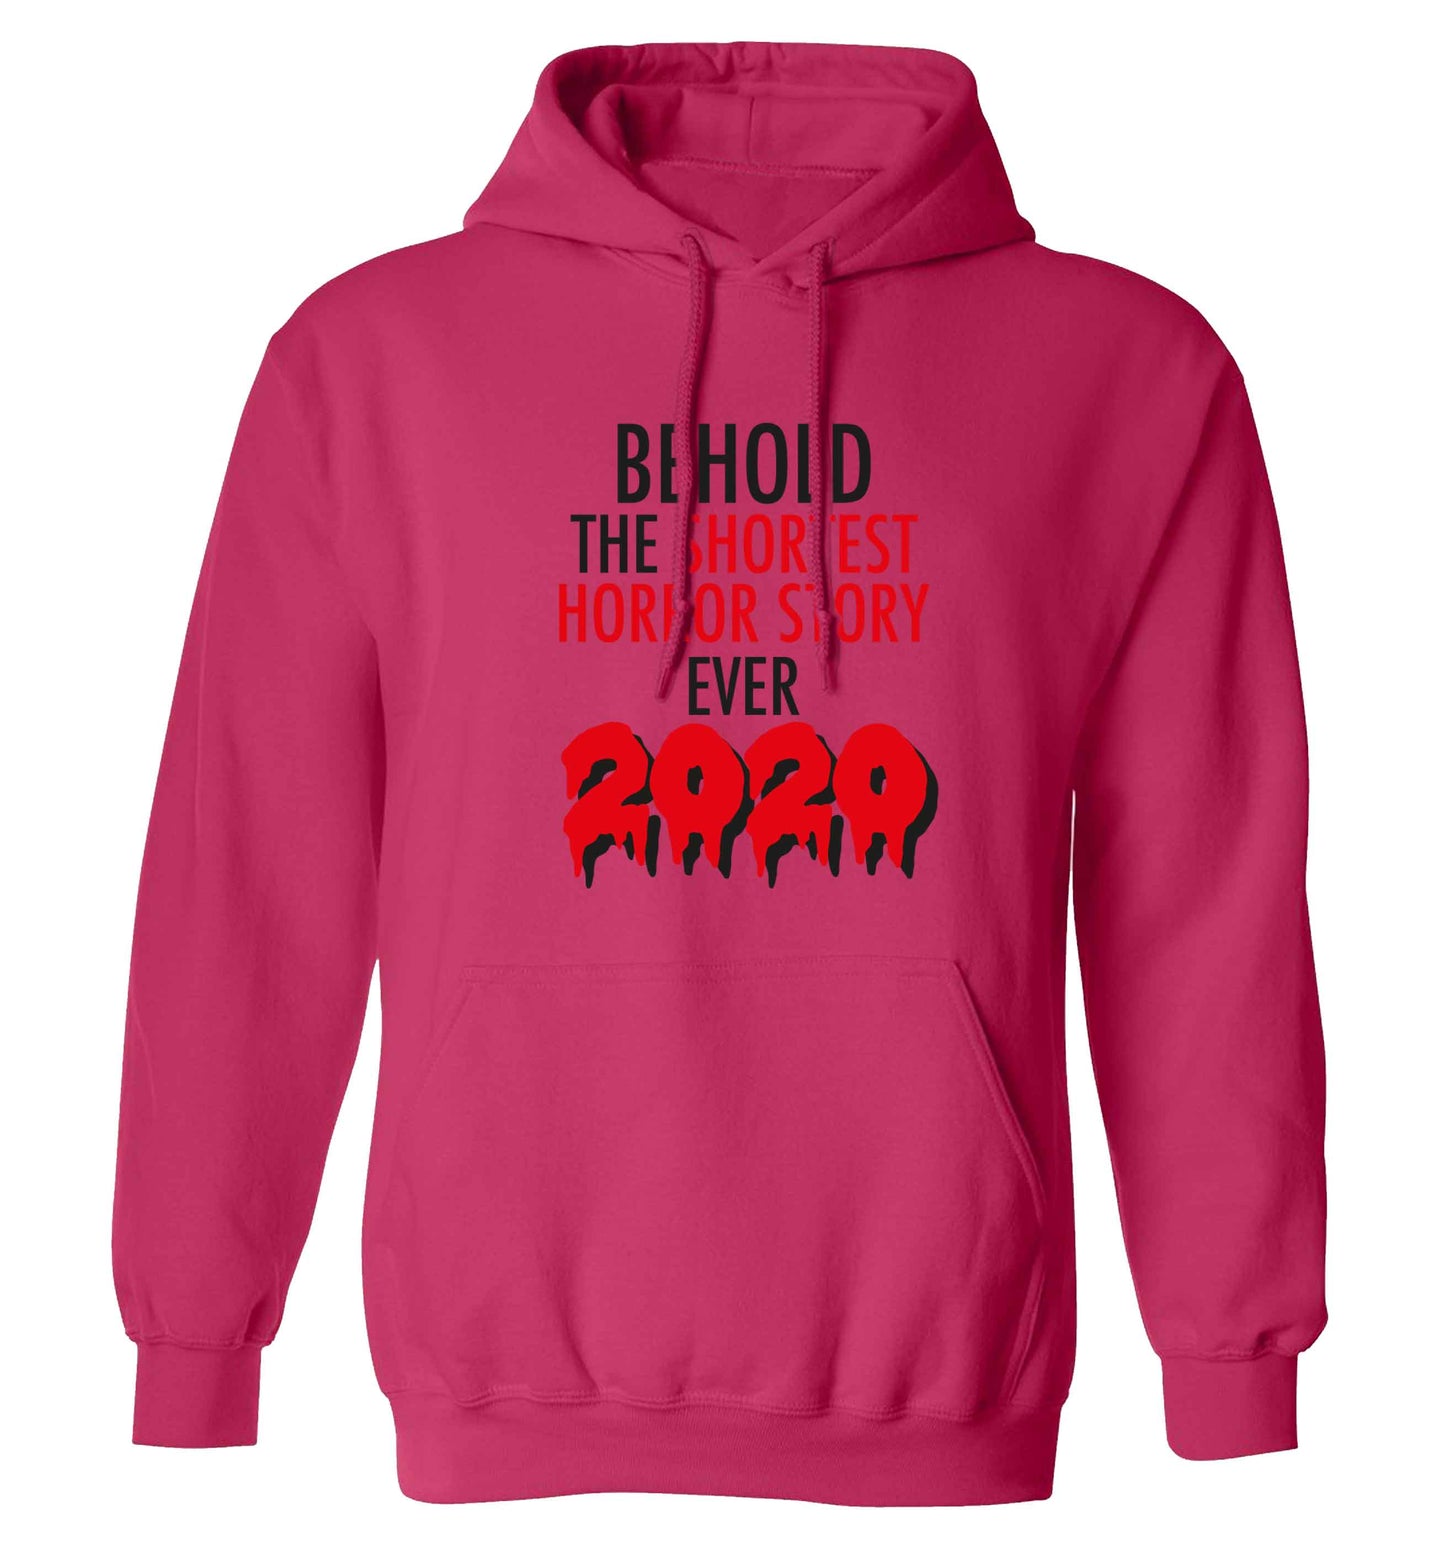 Shortest horror story ever 2020 adults unisex pink hoodie 2XL